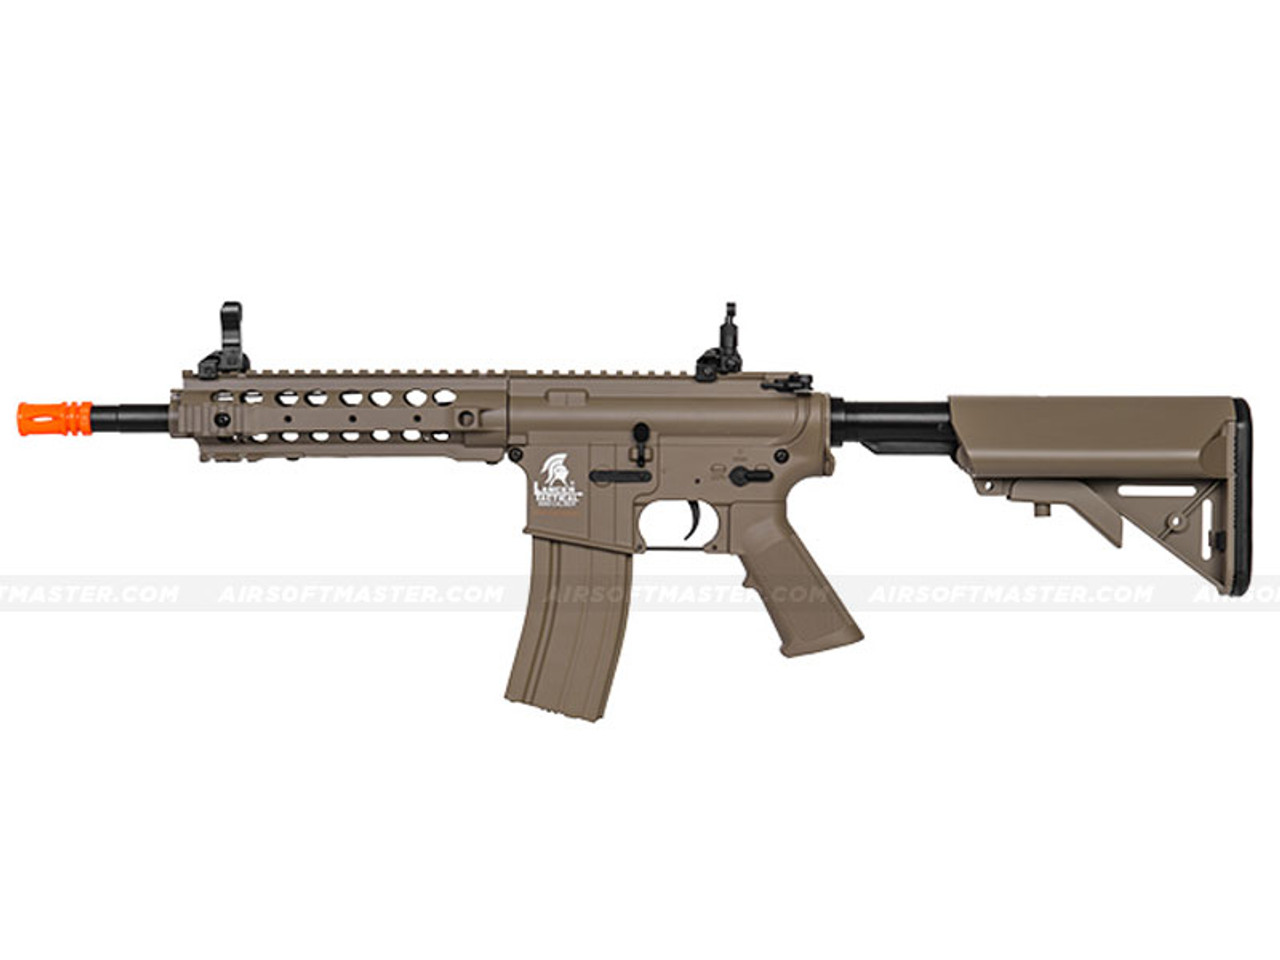 https://cdn11.bigcommerce.com/s-78737/images/stencil/1280x1280/products/4439/3372/M4-With-FREE-FLOAT-RAIL-Airsoft-Electric-Rifle-Tan__59306.1487041711.jpg?c=2